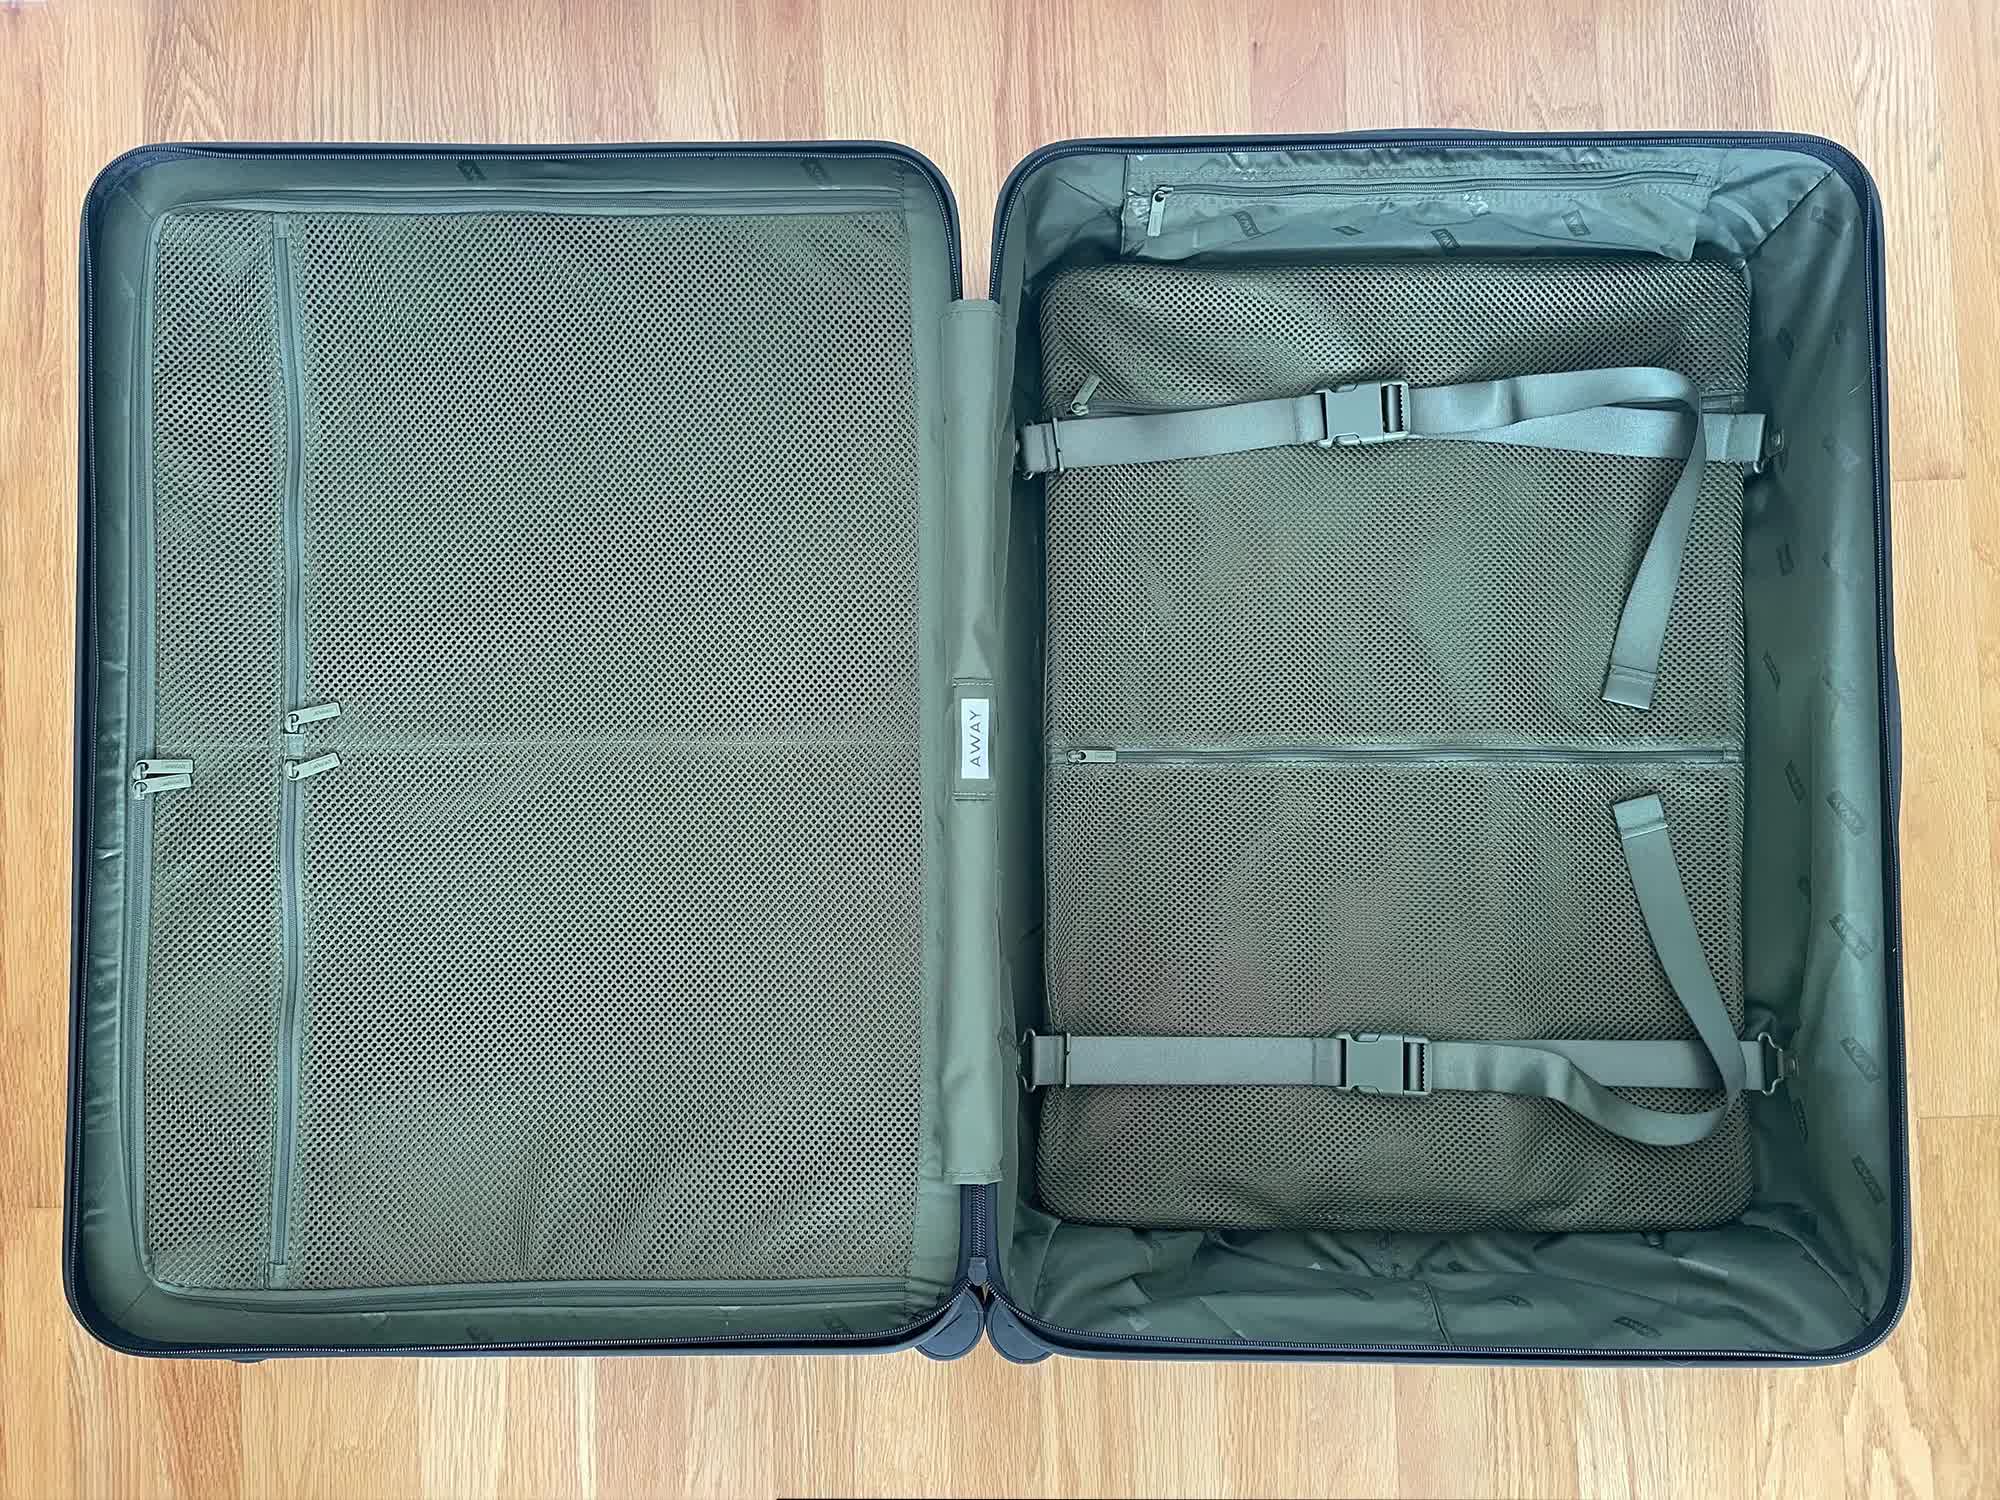 BÉIS 'The Carry-On' in Olive - Olive Green Carry-On Luggage & Suitcases